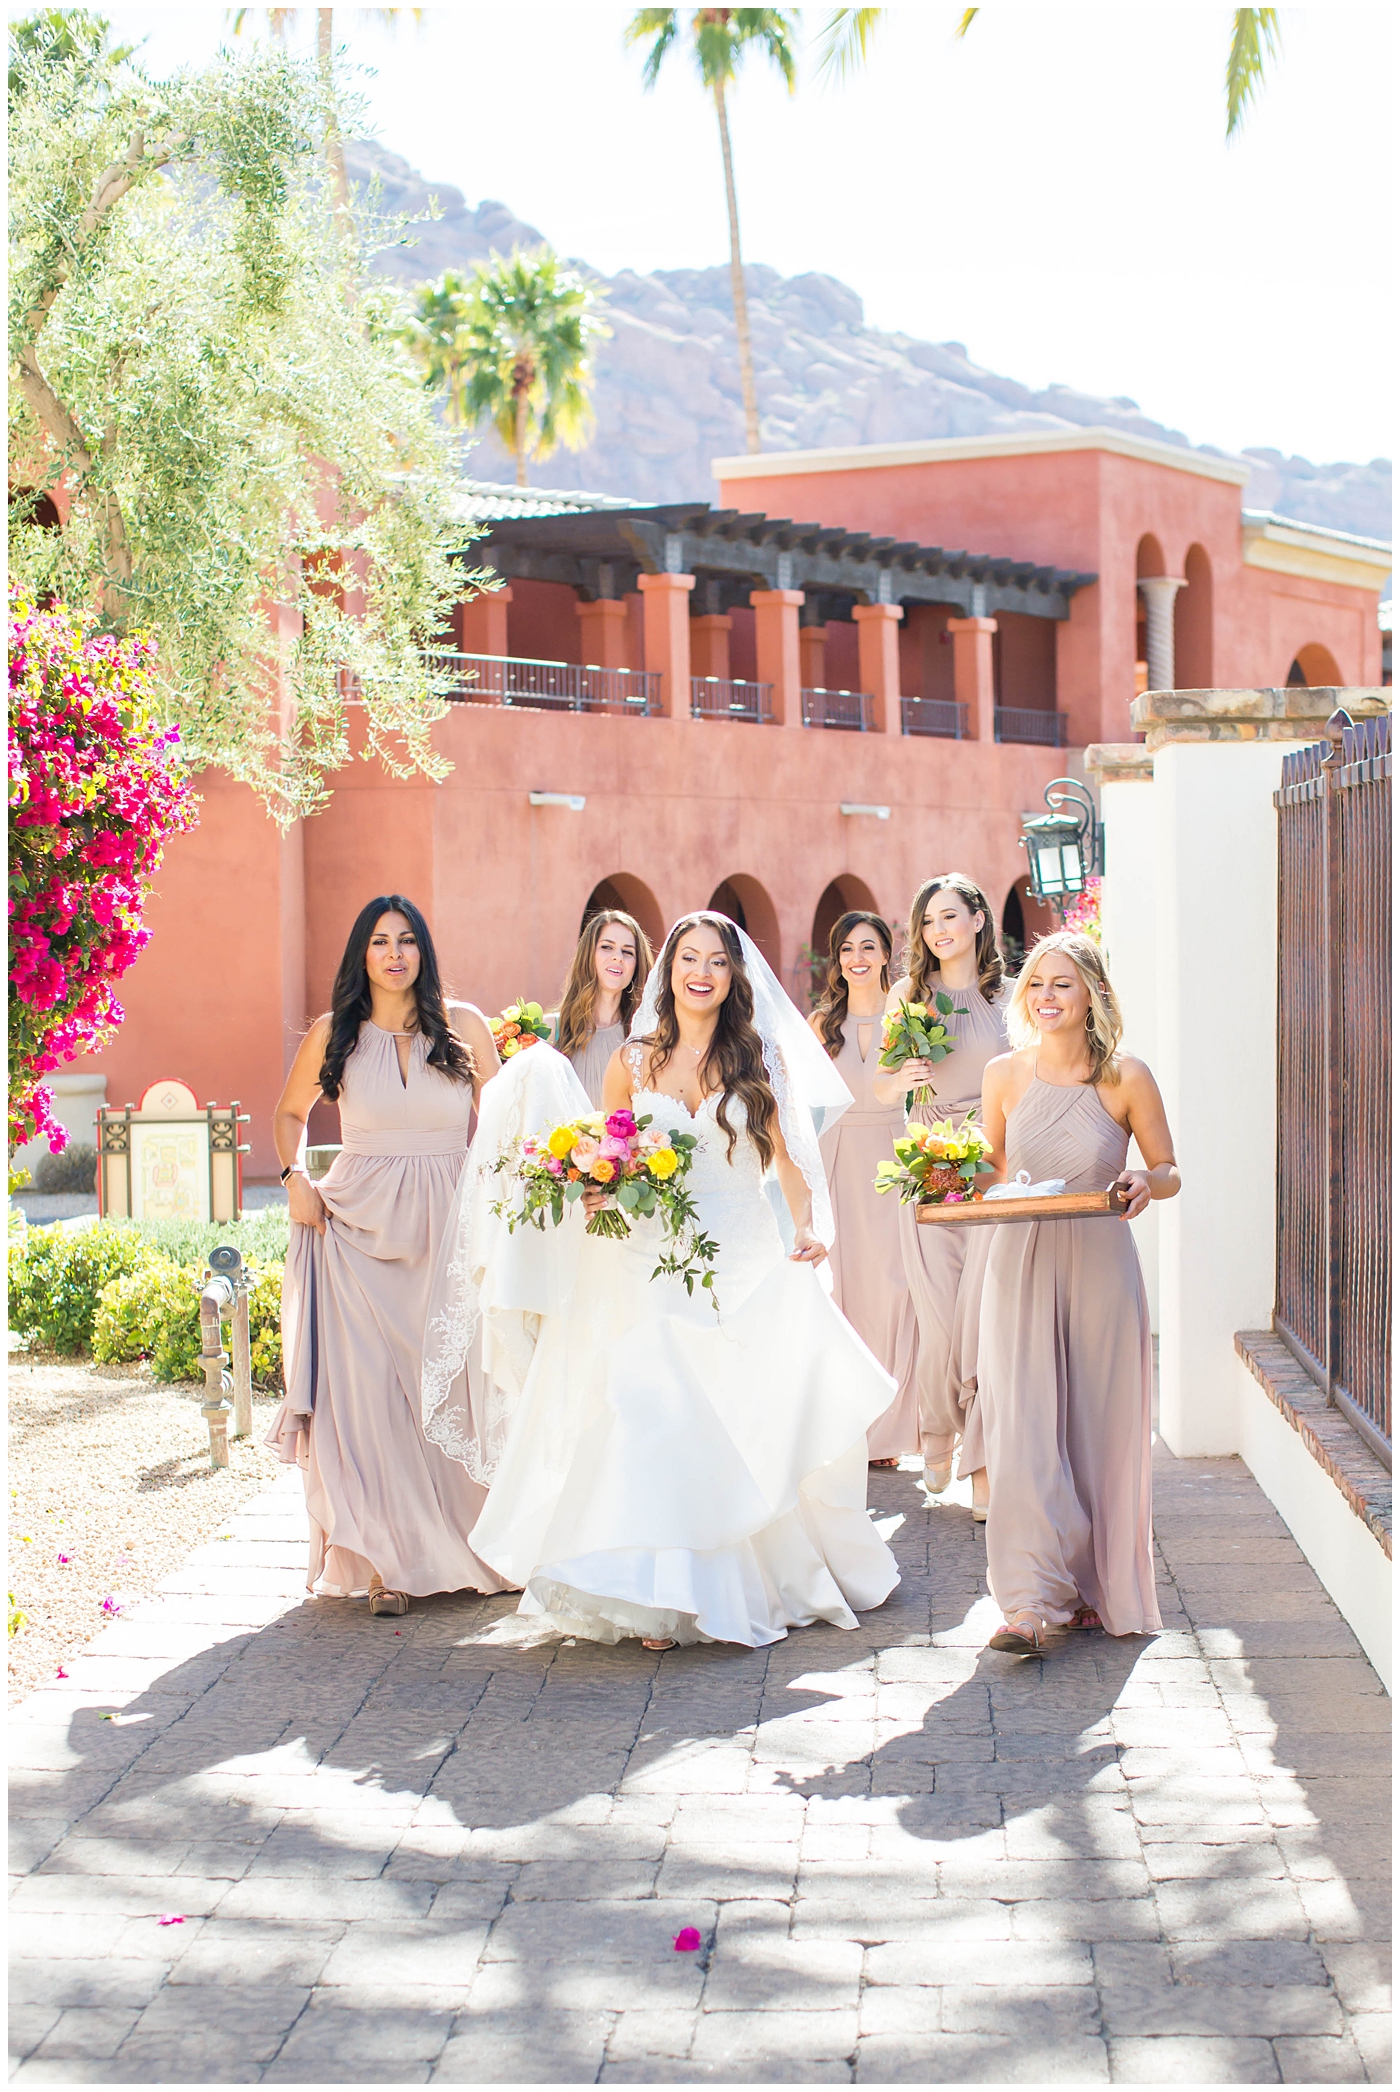 bride in lace cap sleeve wedding dress walking with bridesmaids in azazie dresses on wedding day